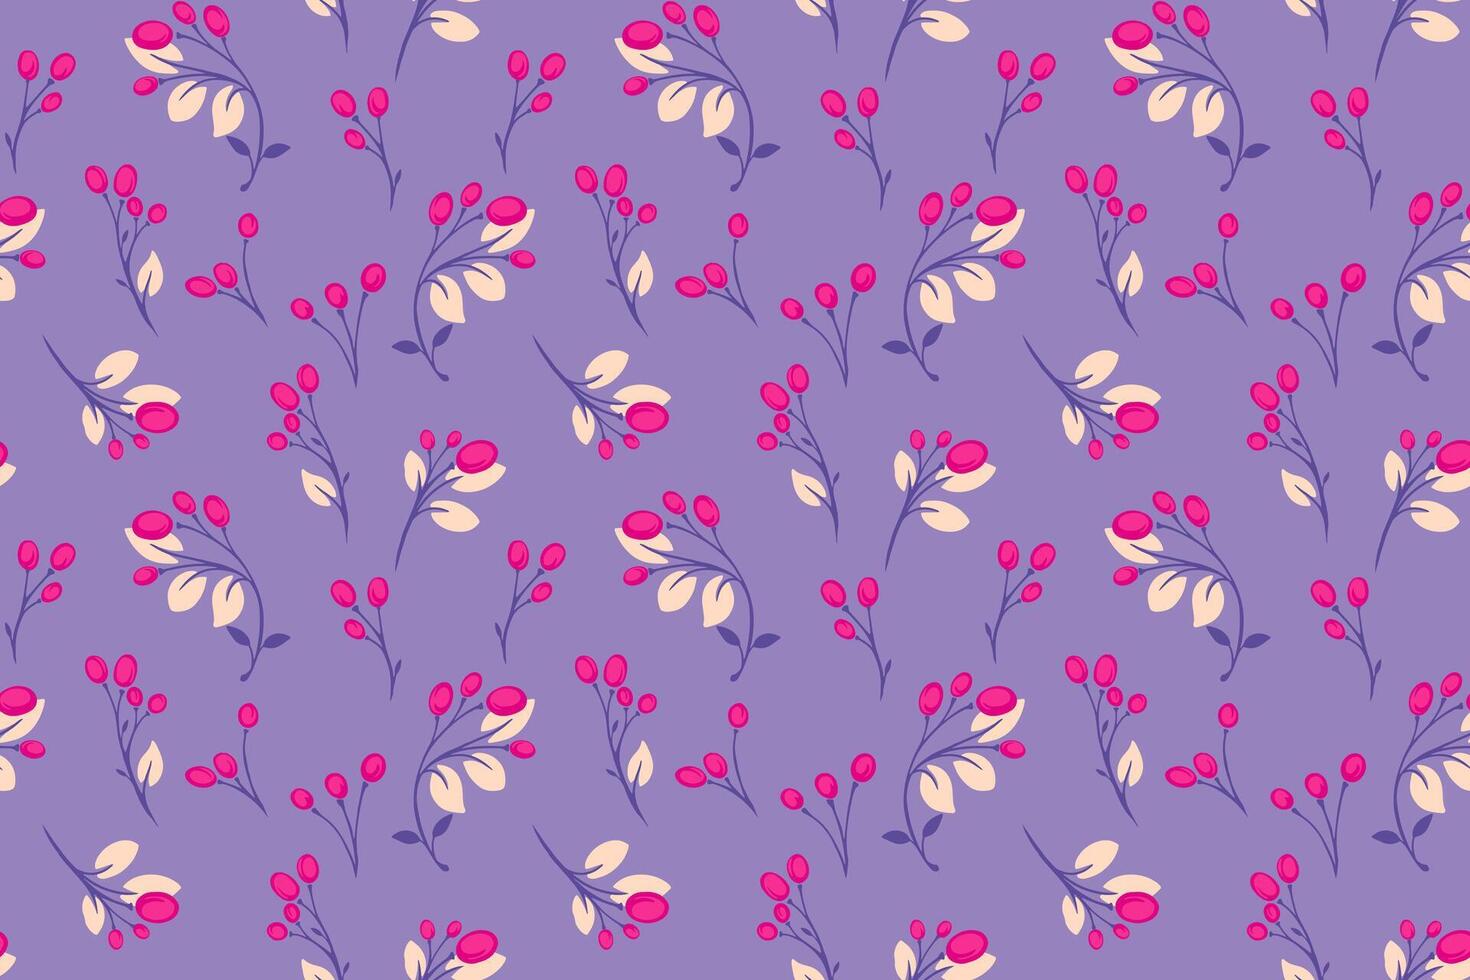 Purple pastel seamless pattern with creative abstract tiny branches with leaves, berries, drops. Cute decorative stylized floral polka dots print. Vector hand drawn illustration. Template for design